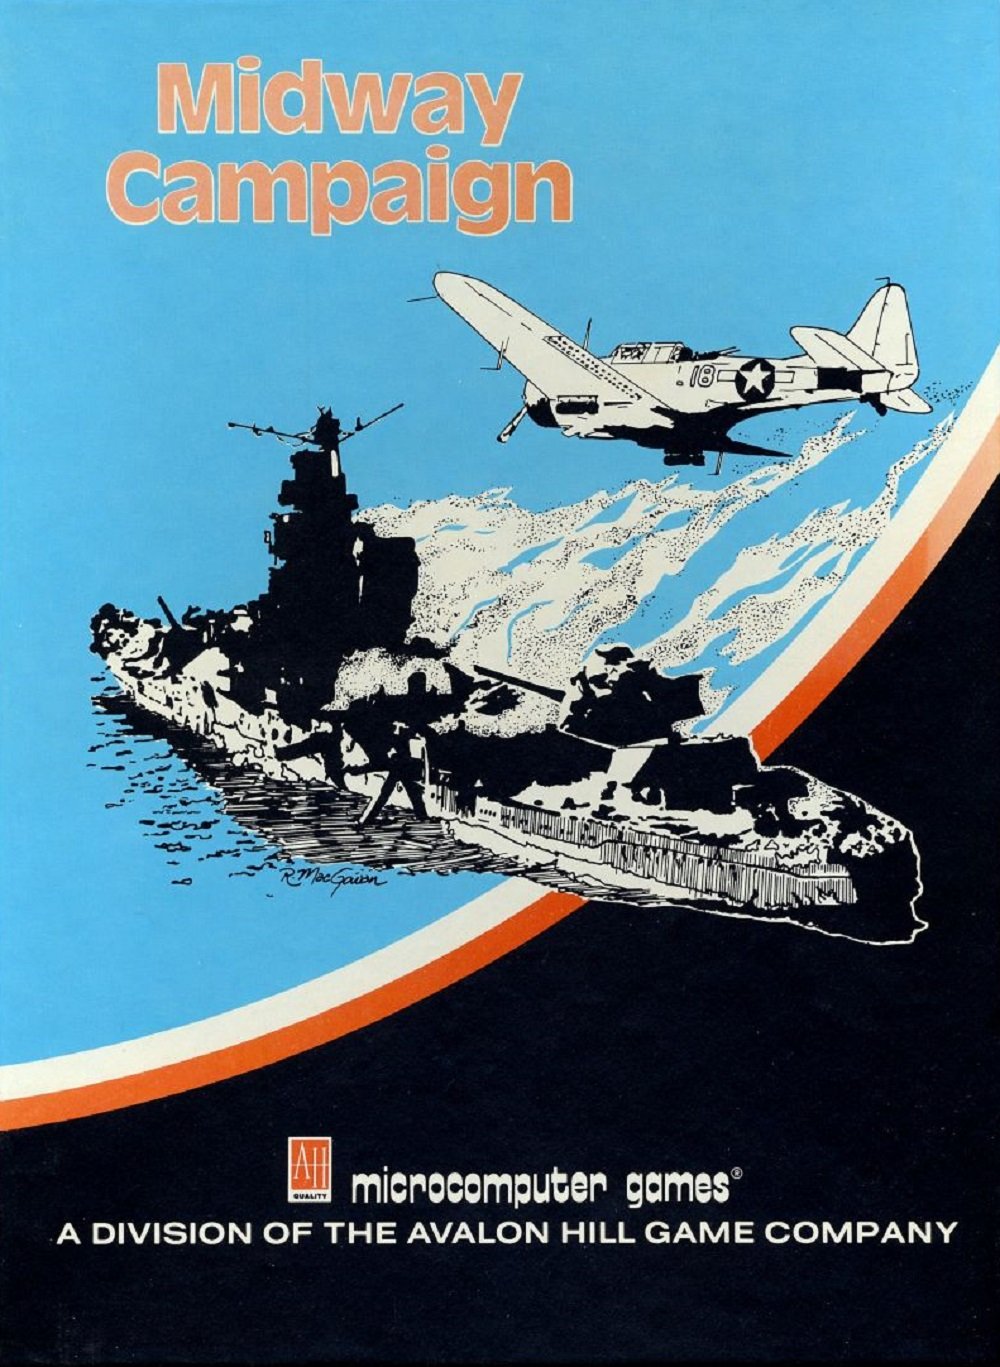 Image of Midway Campaign